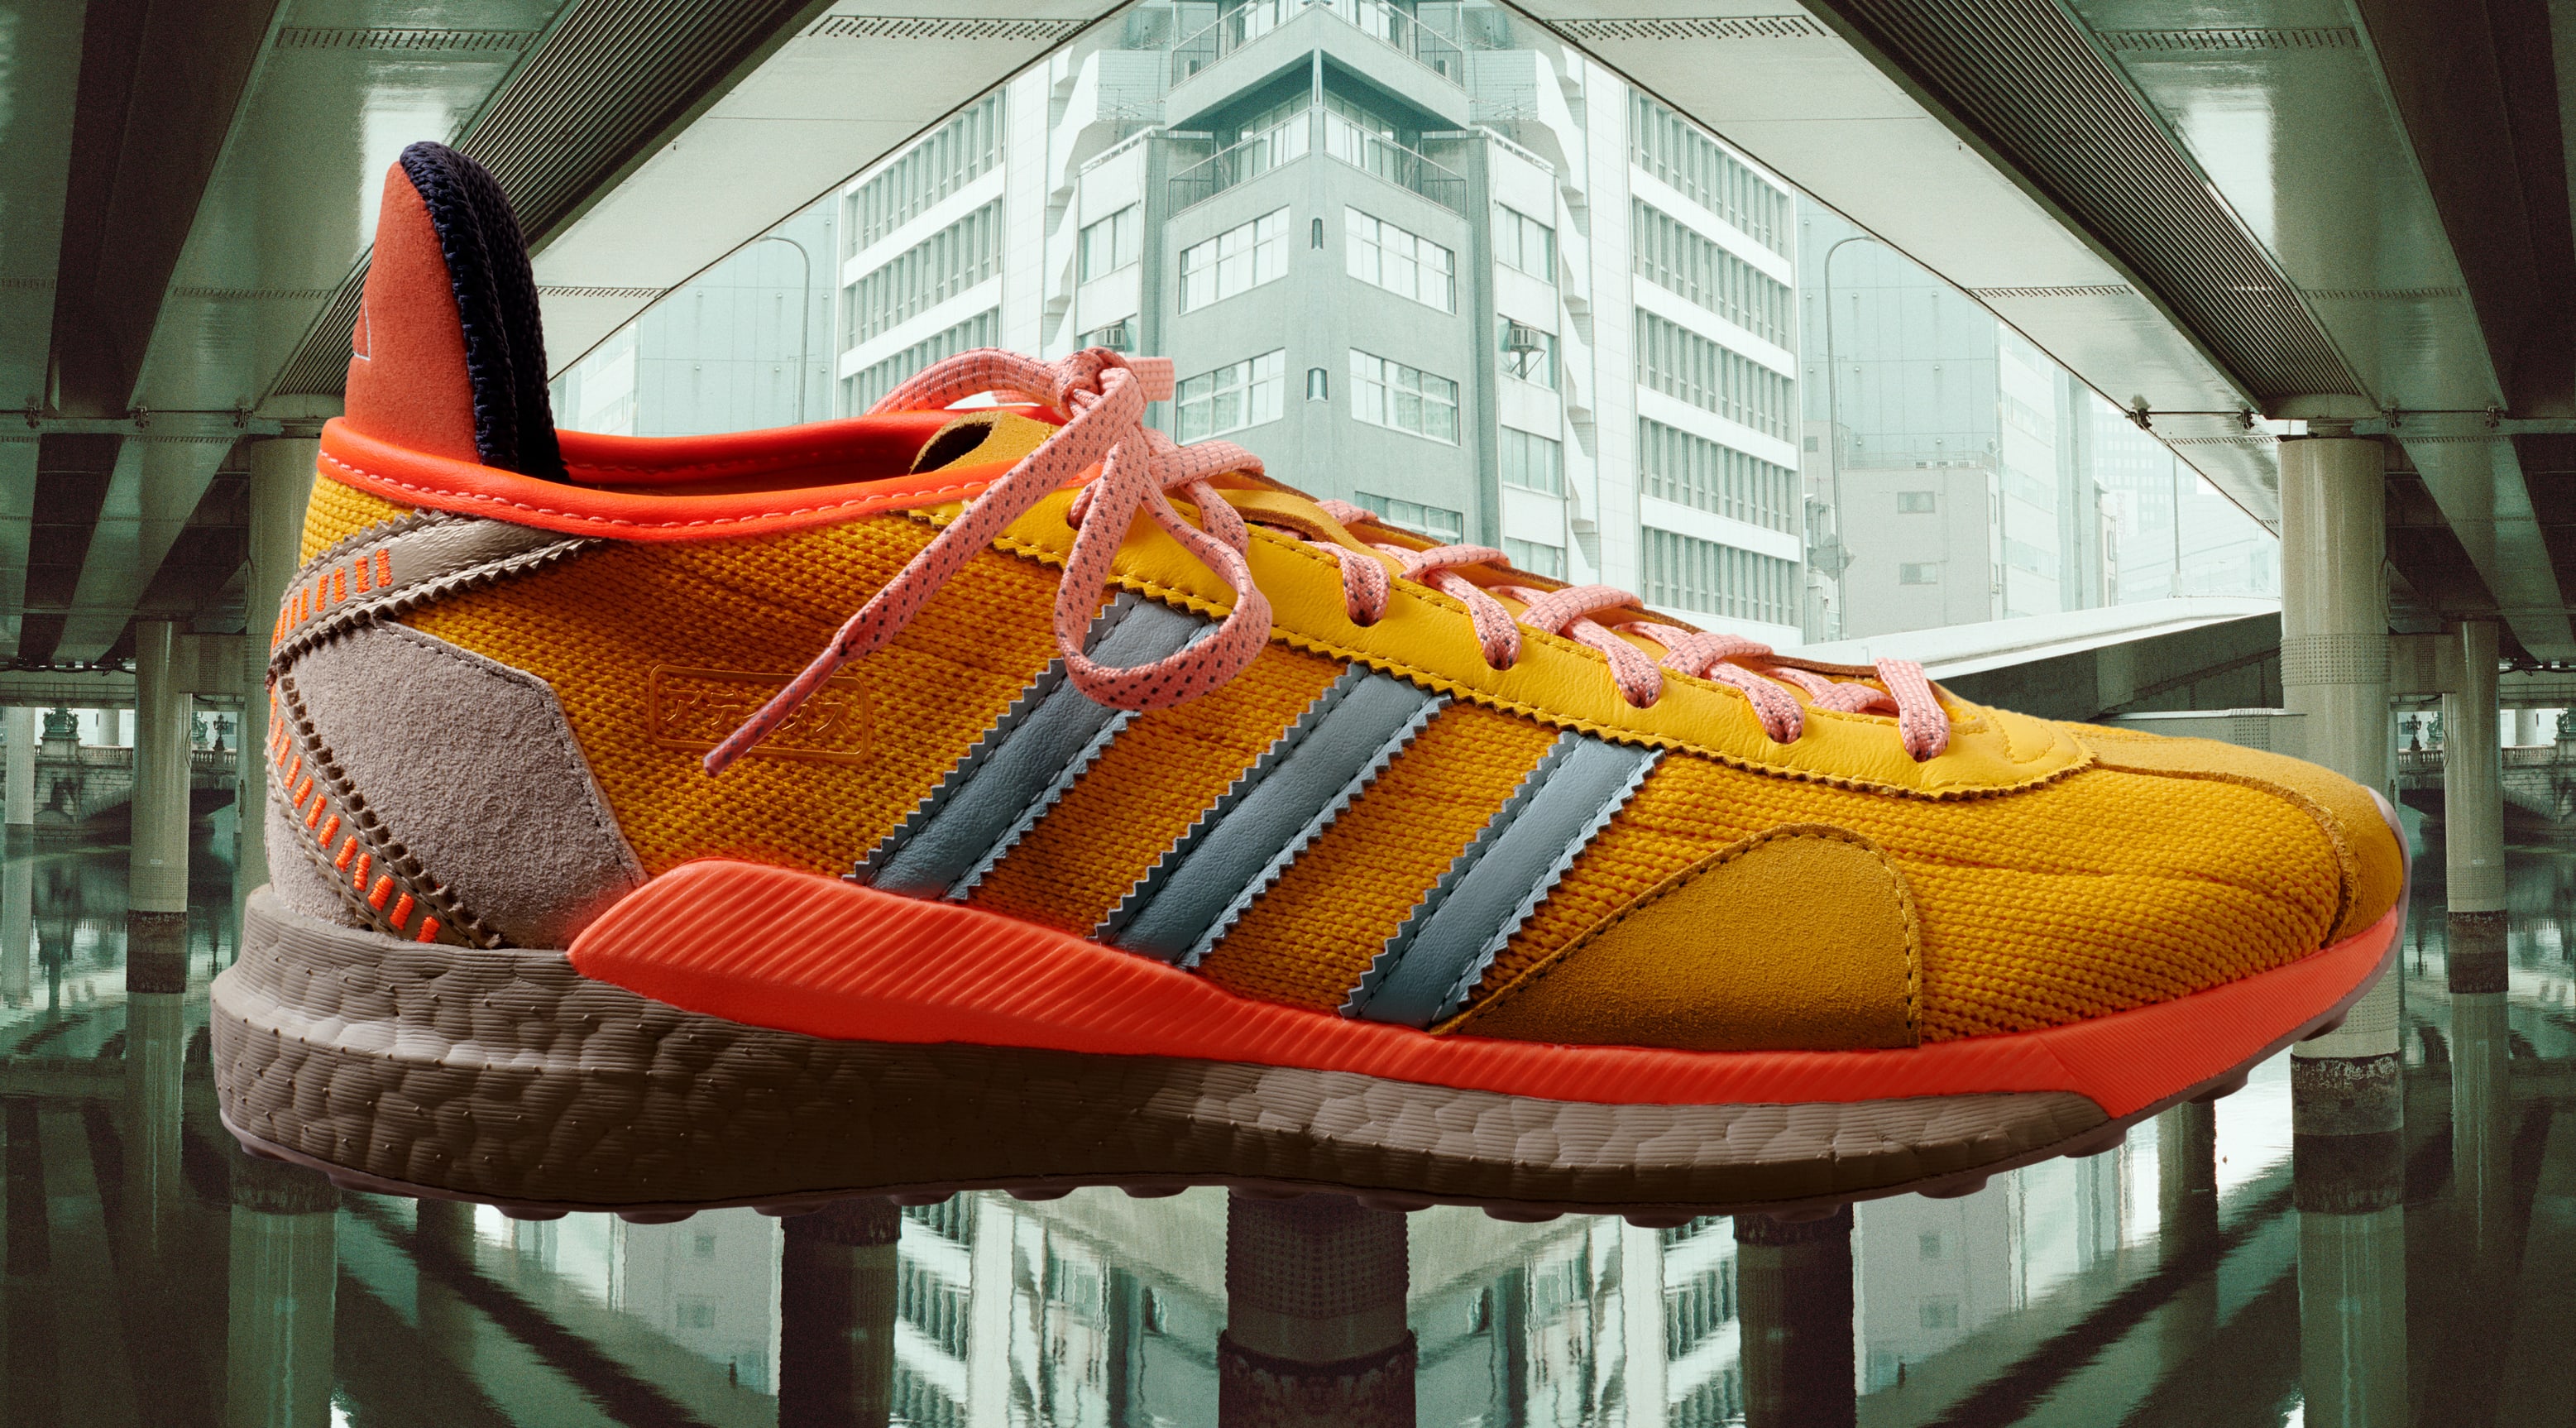 Don't miss out on the adidas x Pharrell Williams x Nigo collaboration